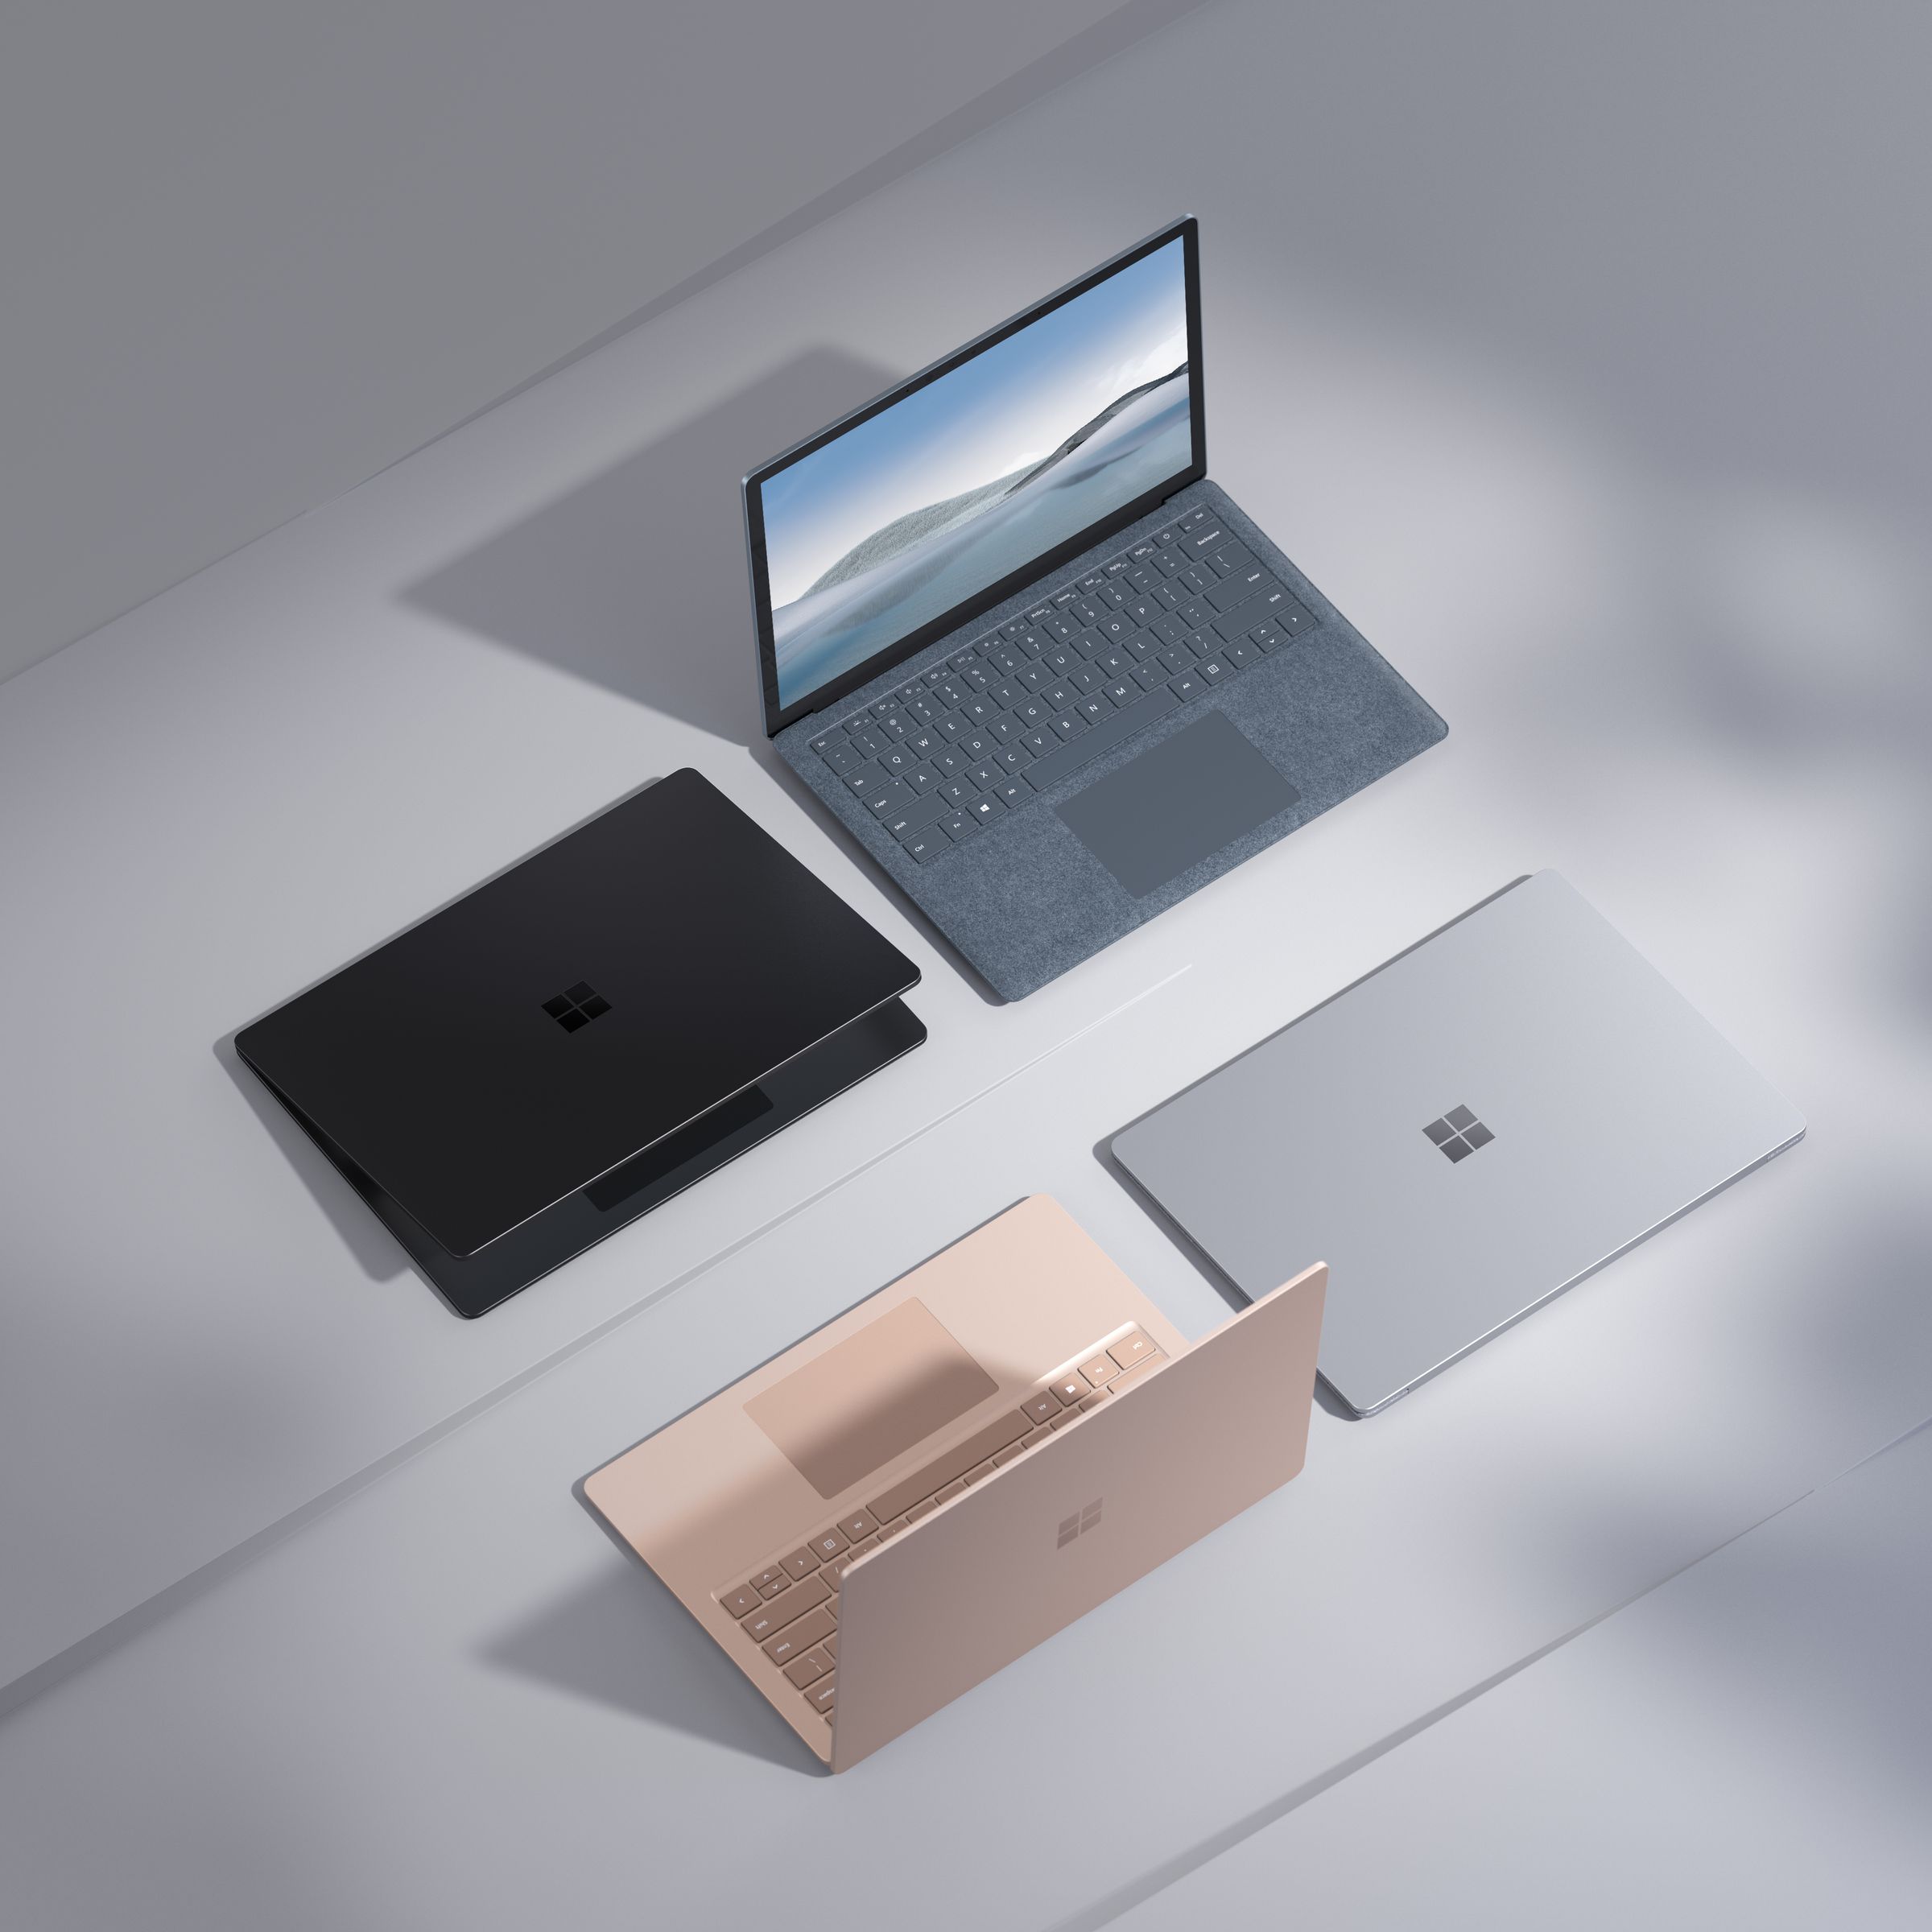 Four Microsoft Surface products in a variety of colors.